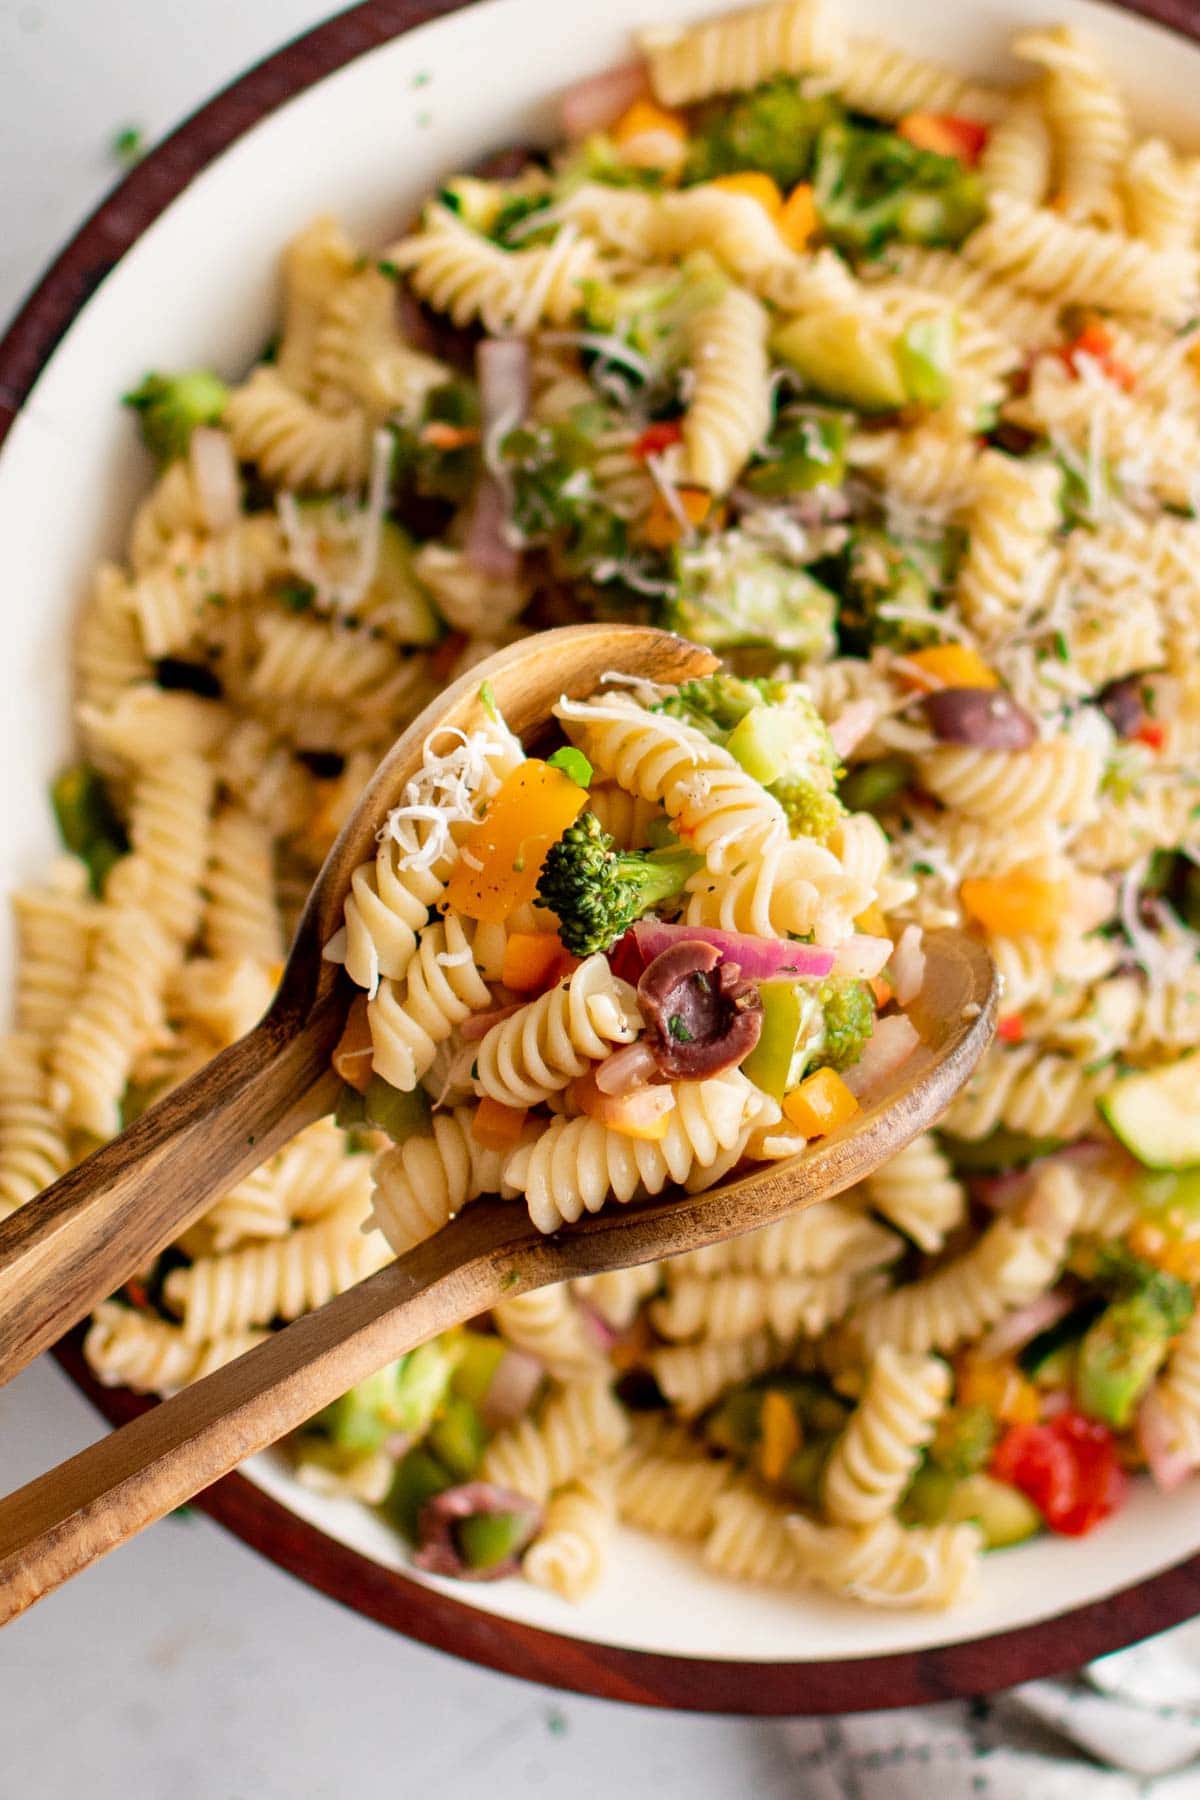 Salad tongs holding a serving of pasta salad with vegetables.